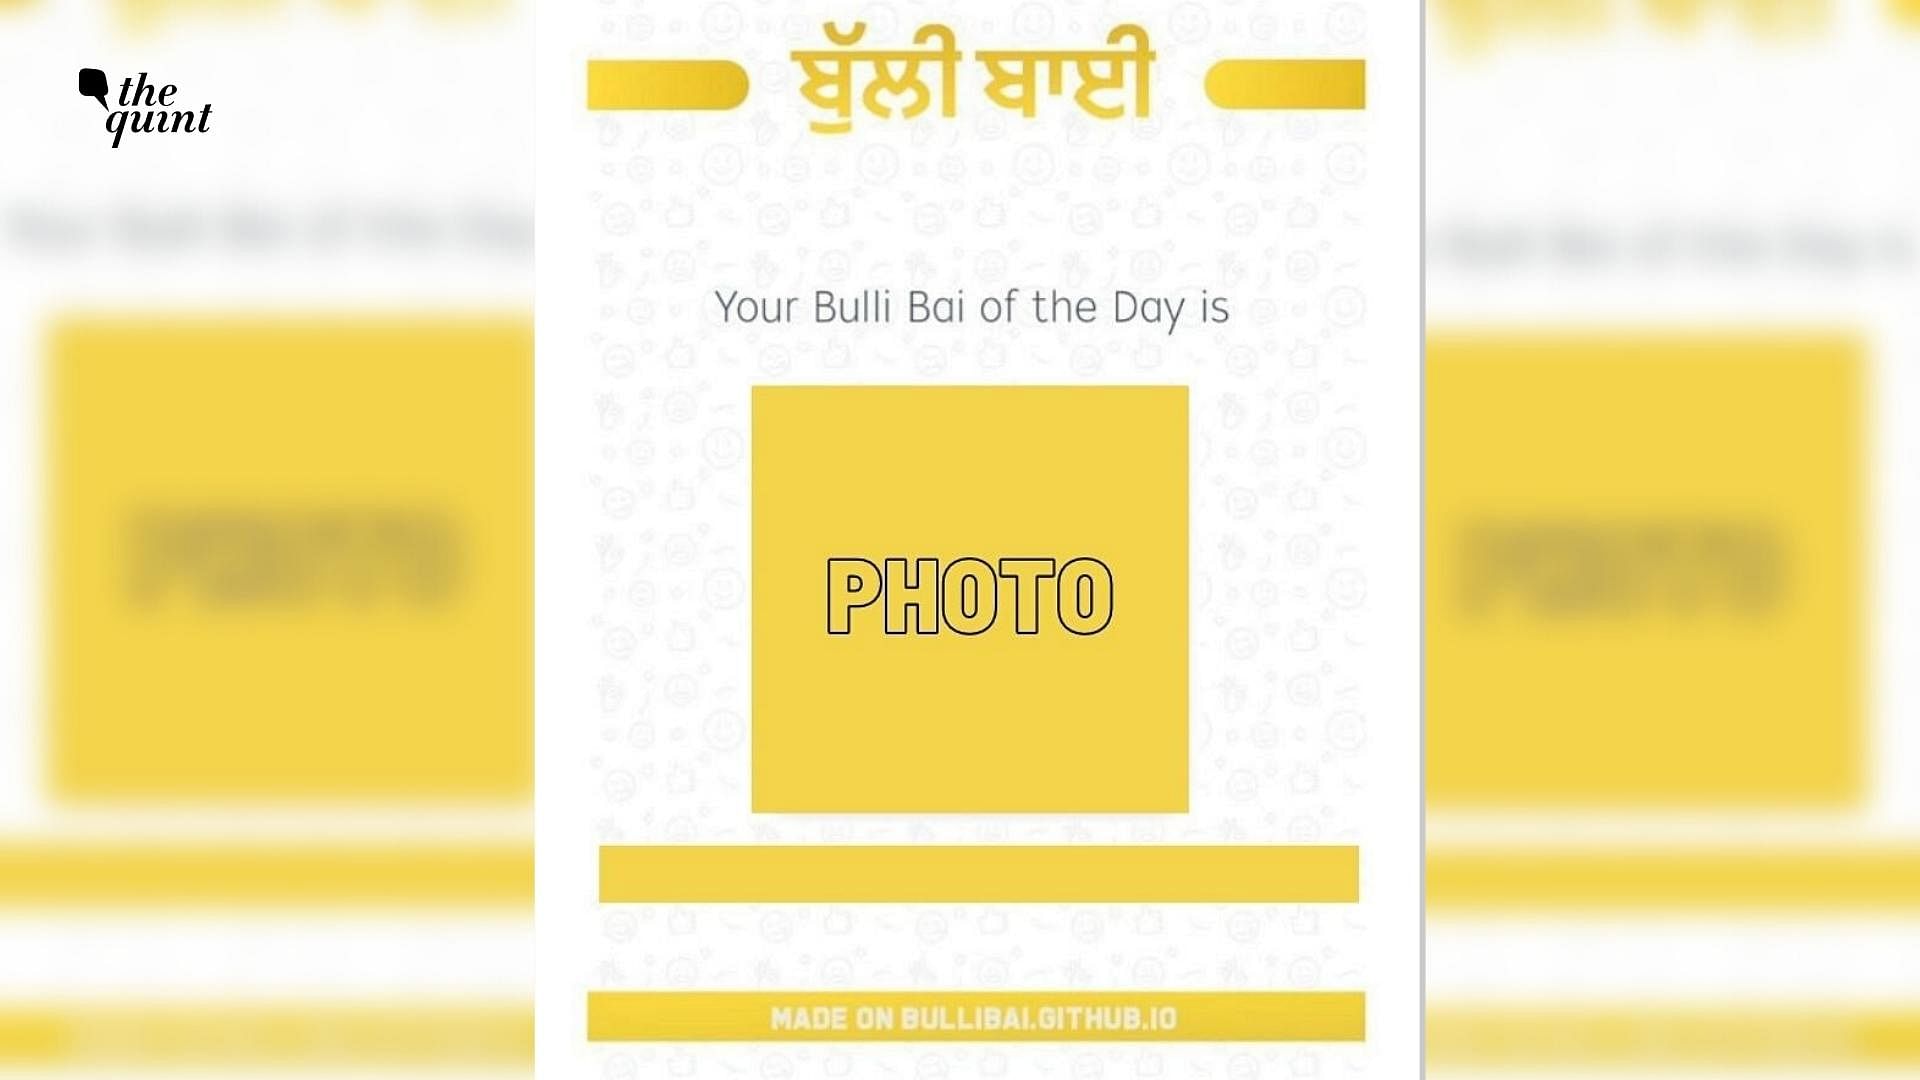 <div class="paragraphs"><p>Photos of hundreds of Muslim women were uploaded by an unidentified group on an app named 'Bulli Bai' using GitHub.</p></div>